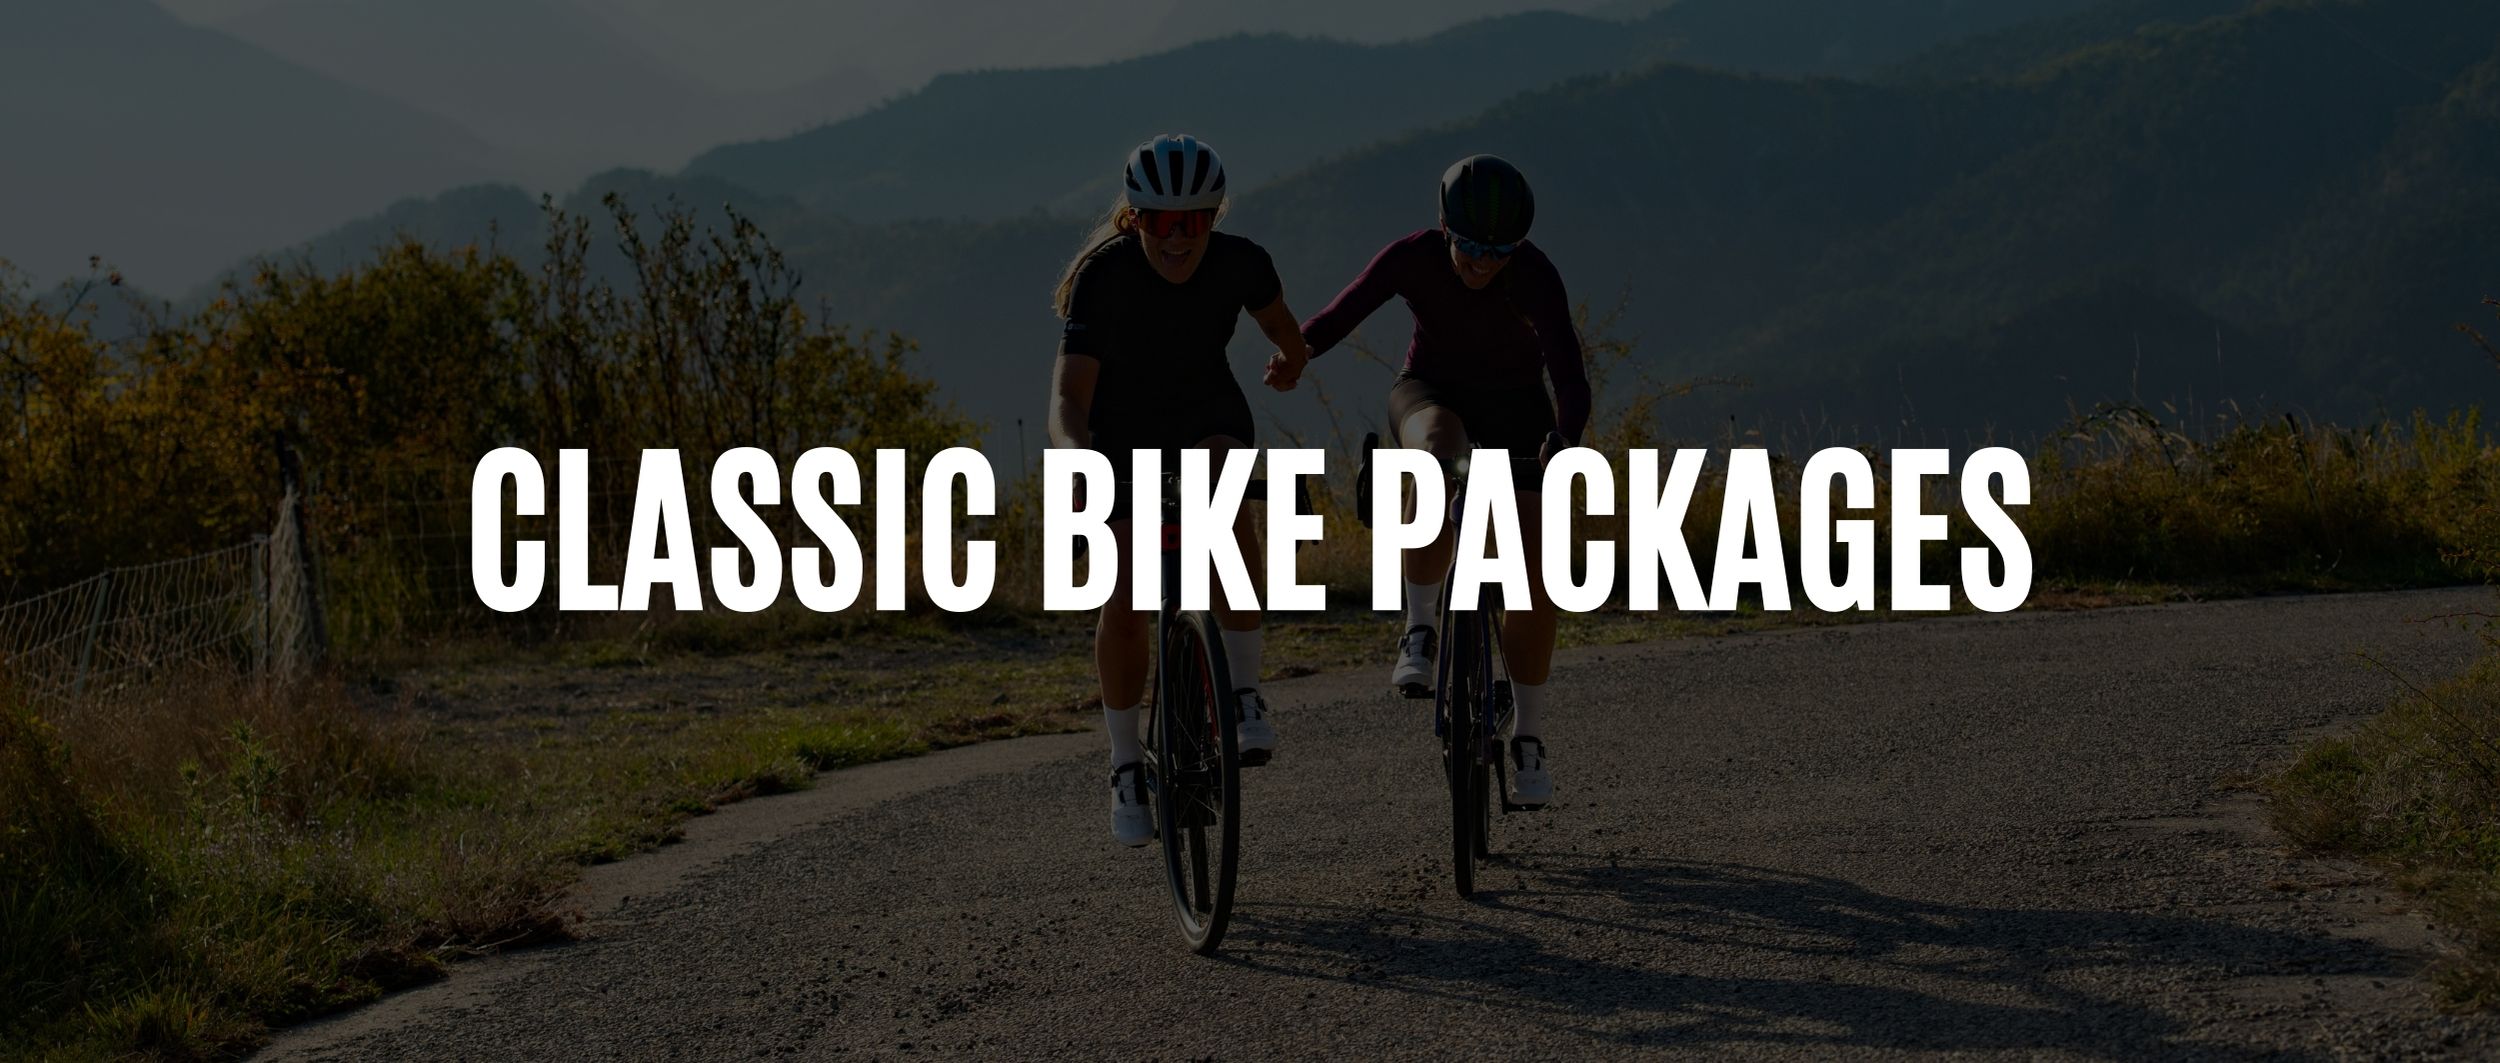 Classic Bike Packages